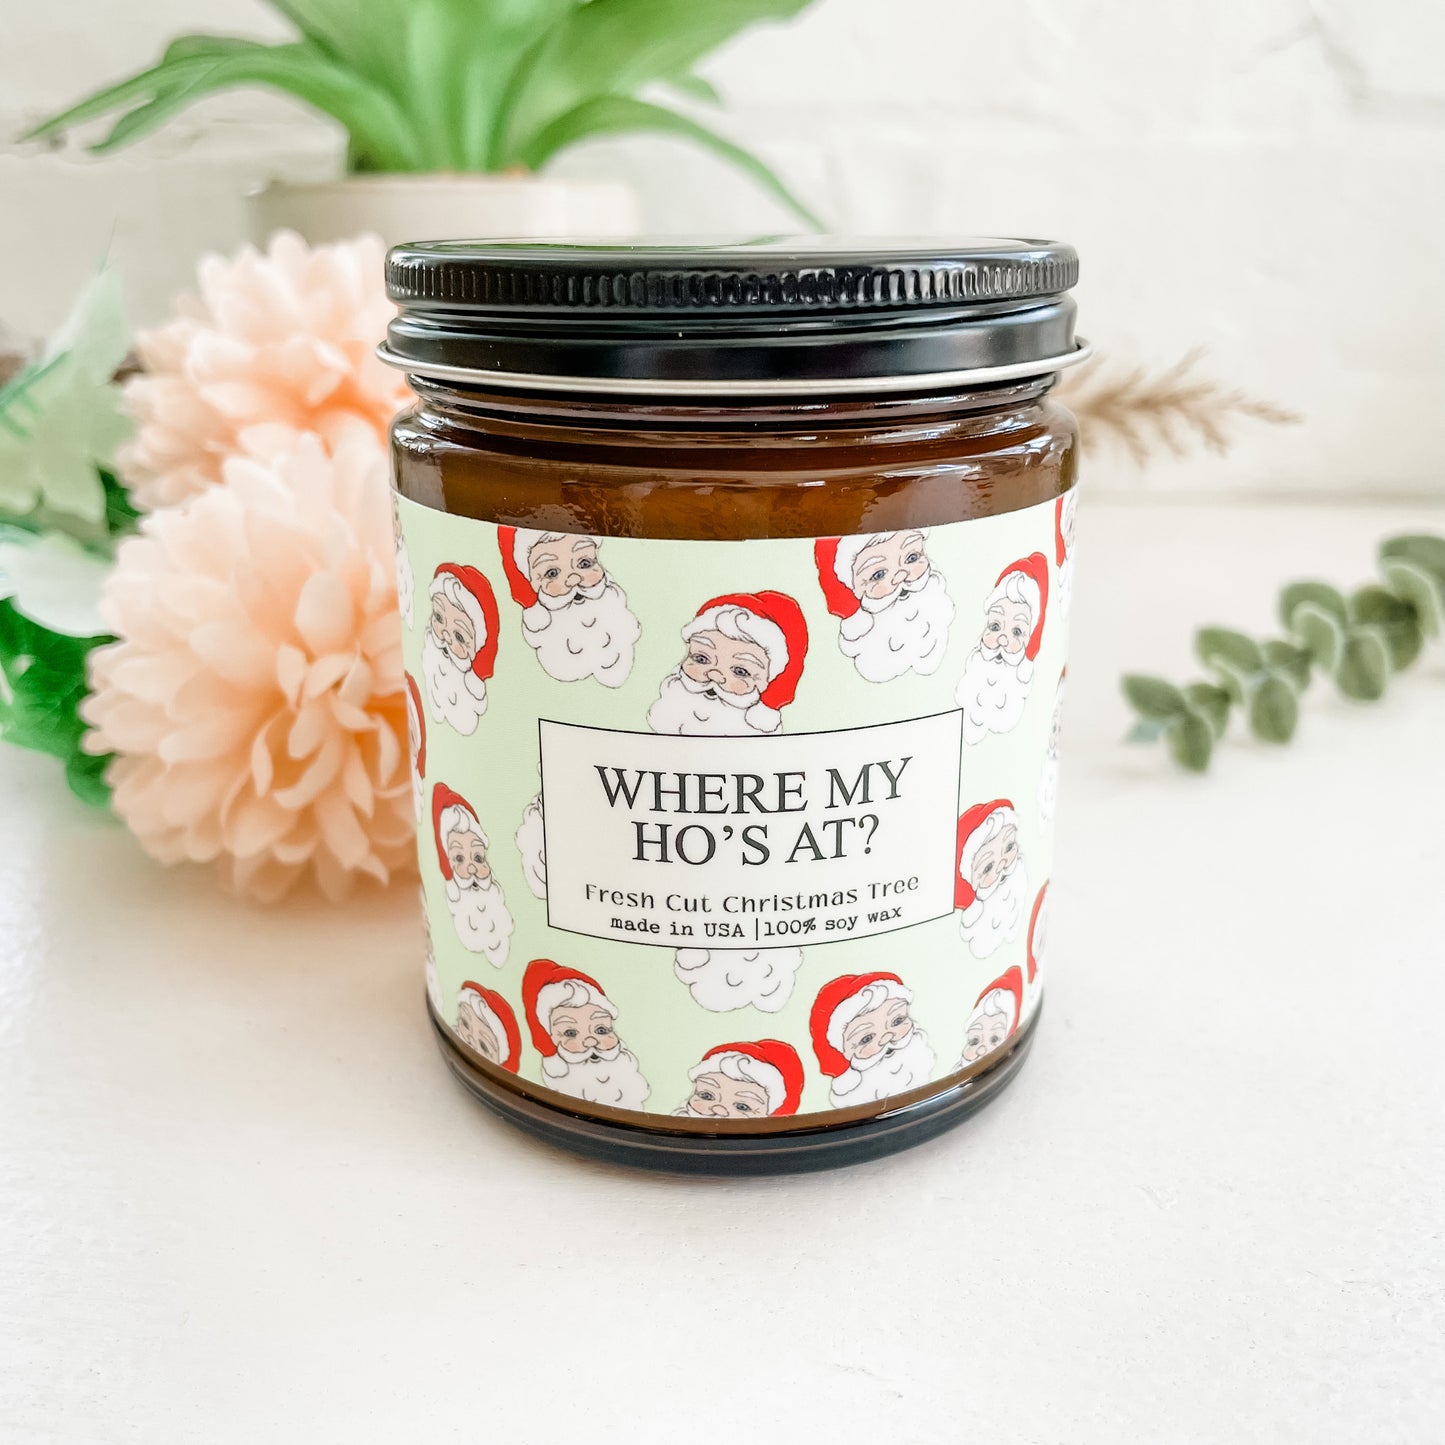 Where My Ho's At? - 9oz Glass Jar Soy Candle - Fresh Cut Christmas Tree Scent